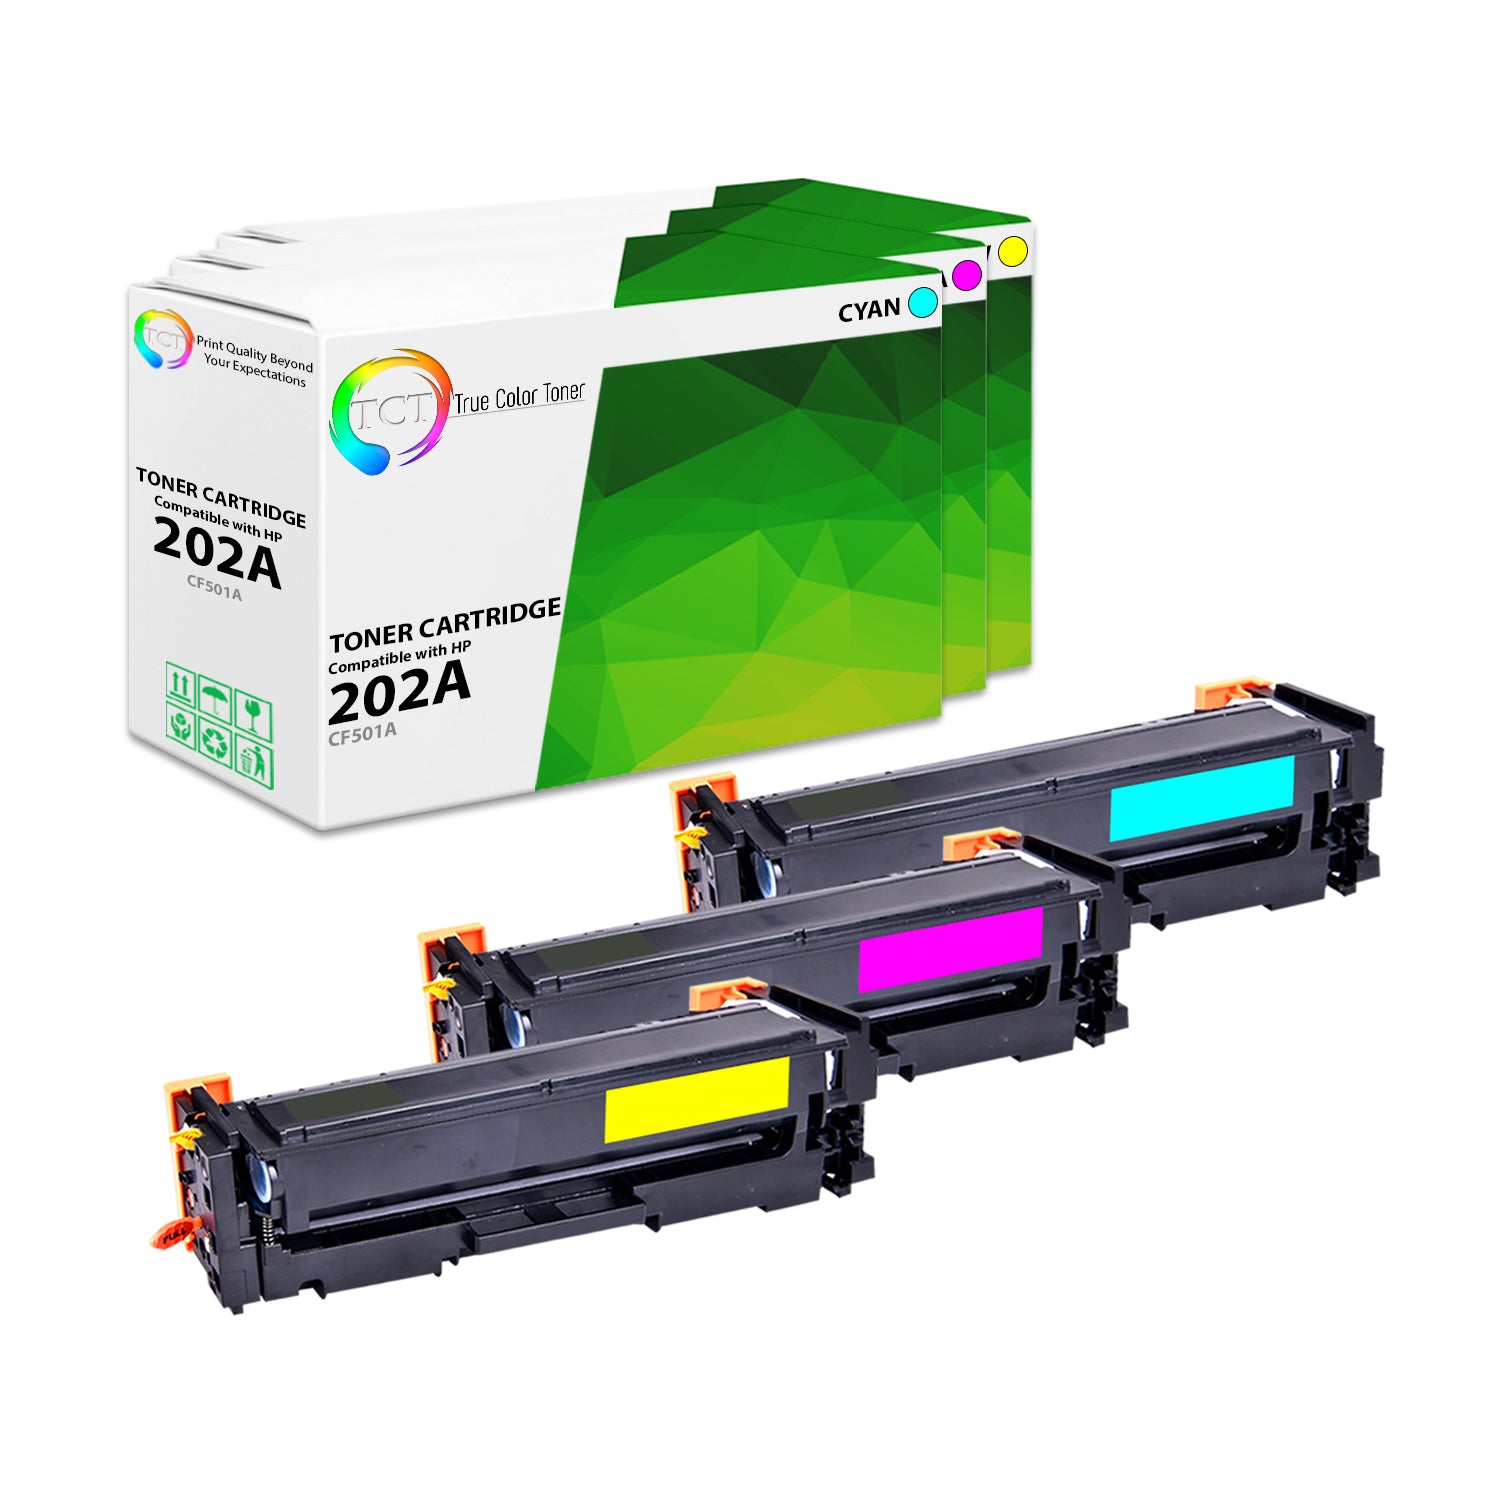 TCT Compatible Toner Cartridge Replacement for the HP 202A Series - 3 Pack (C, M, Y)